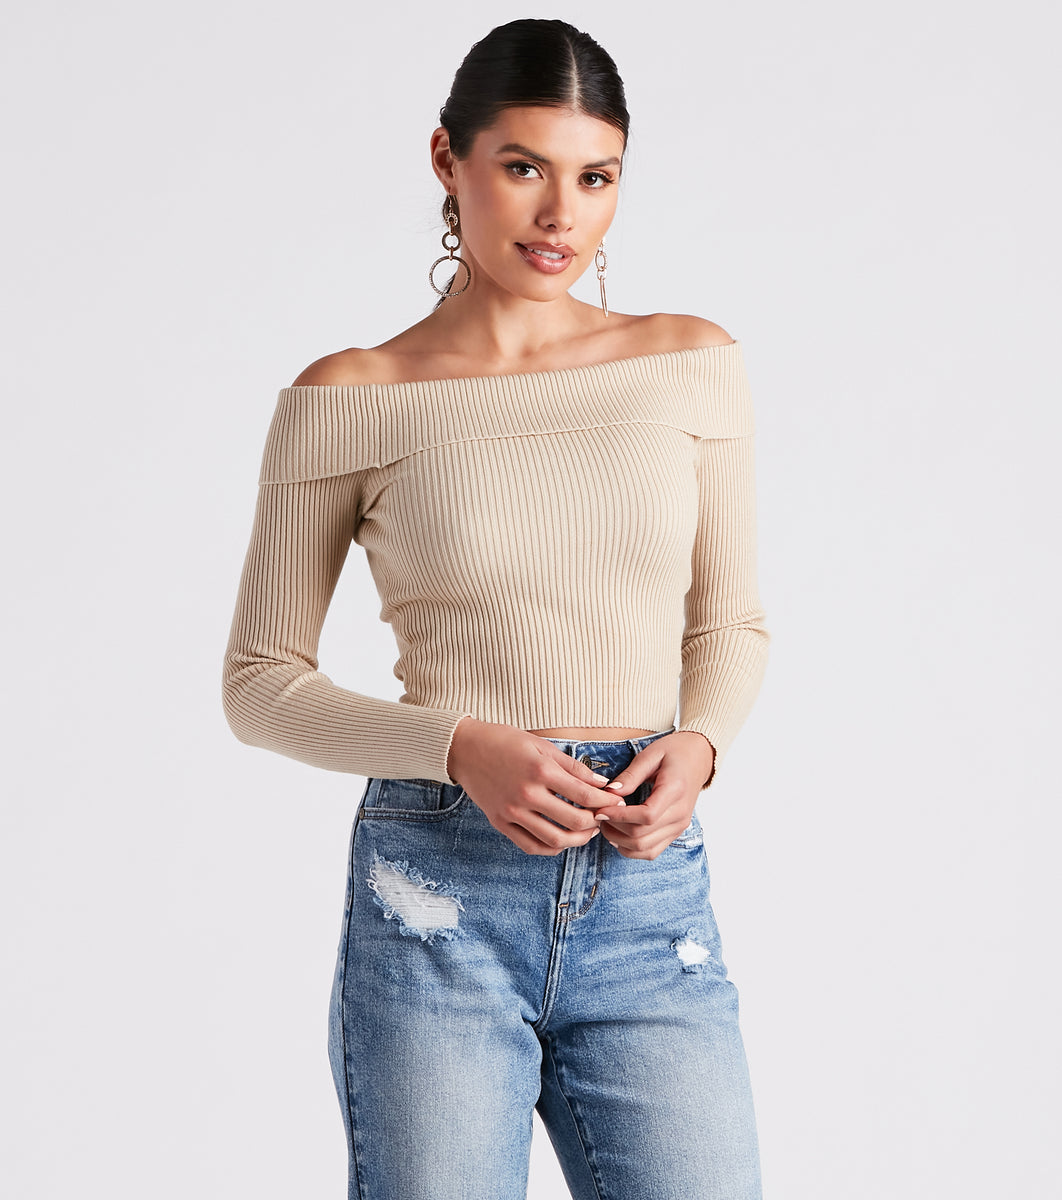 Feel The Knit Foldover Sweater Top